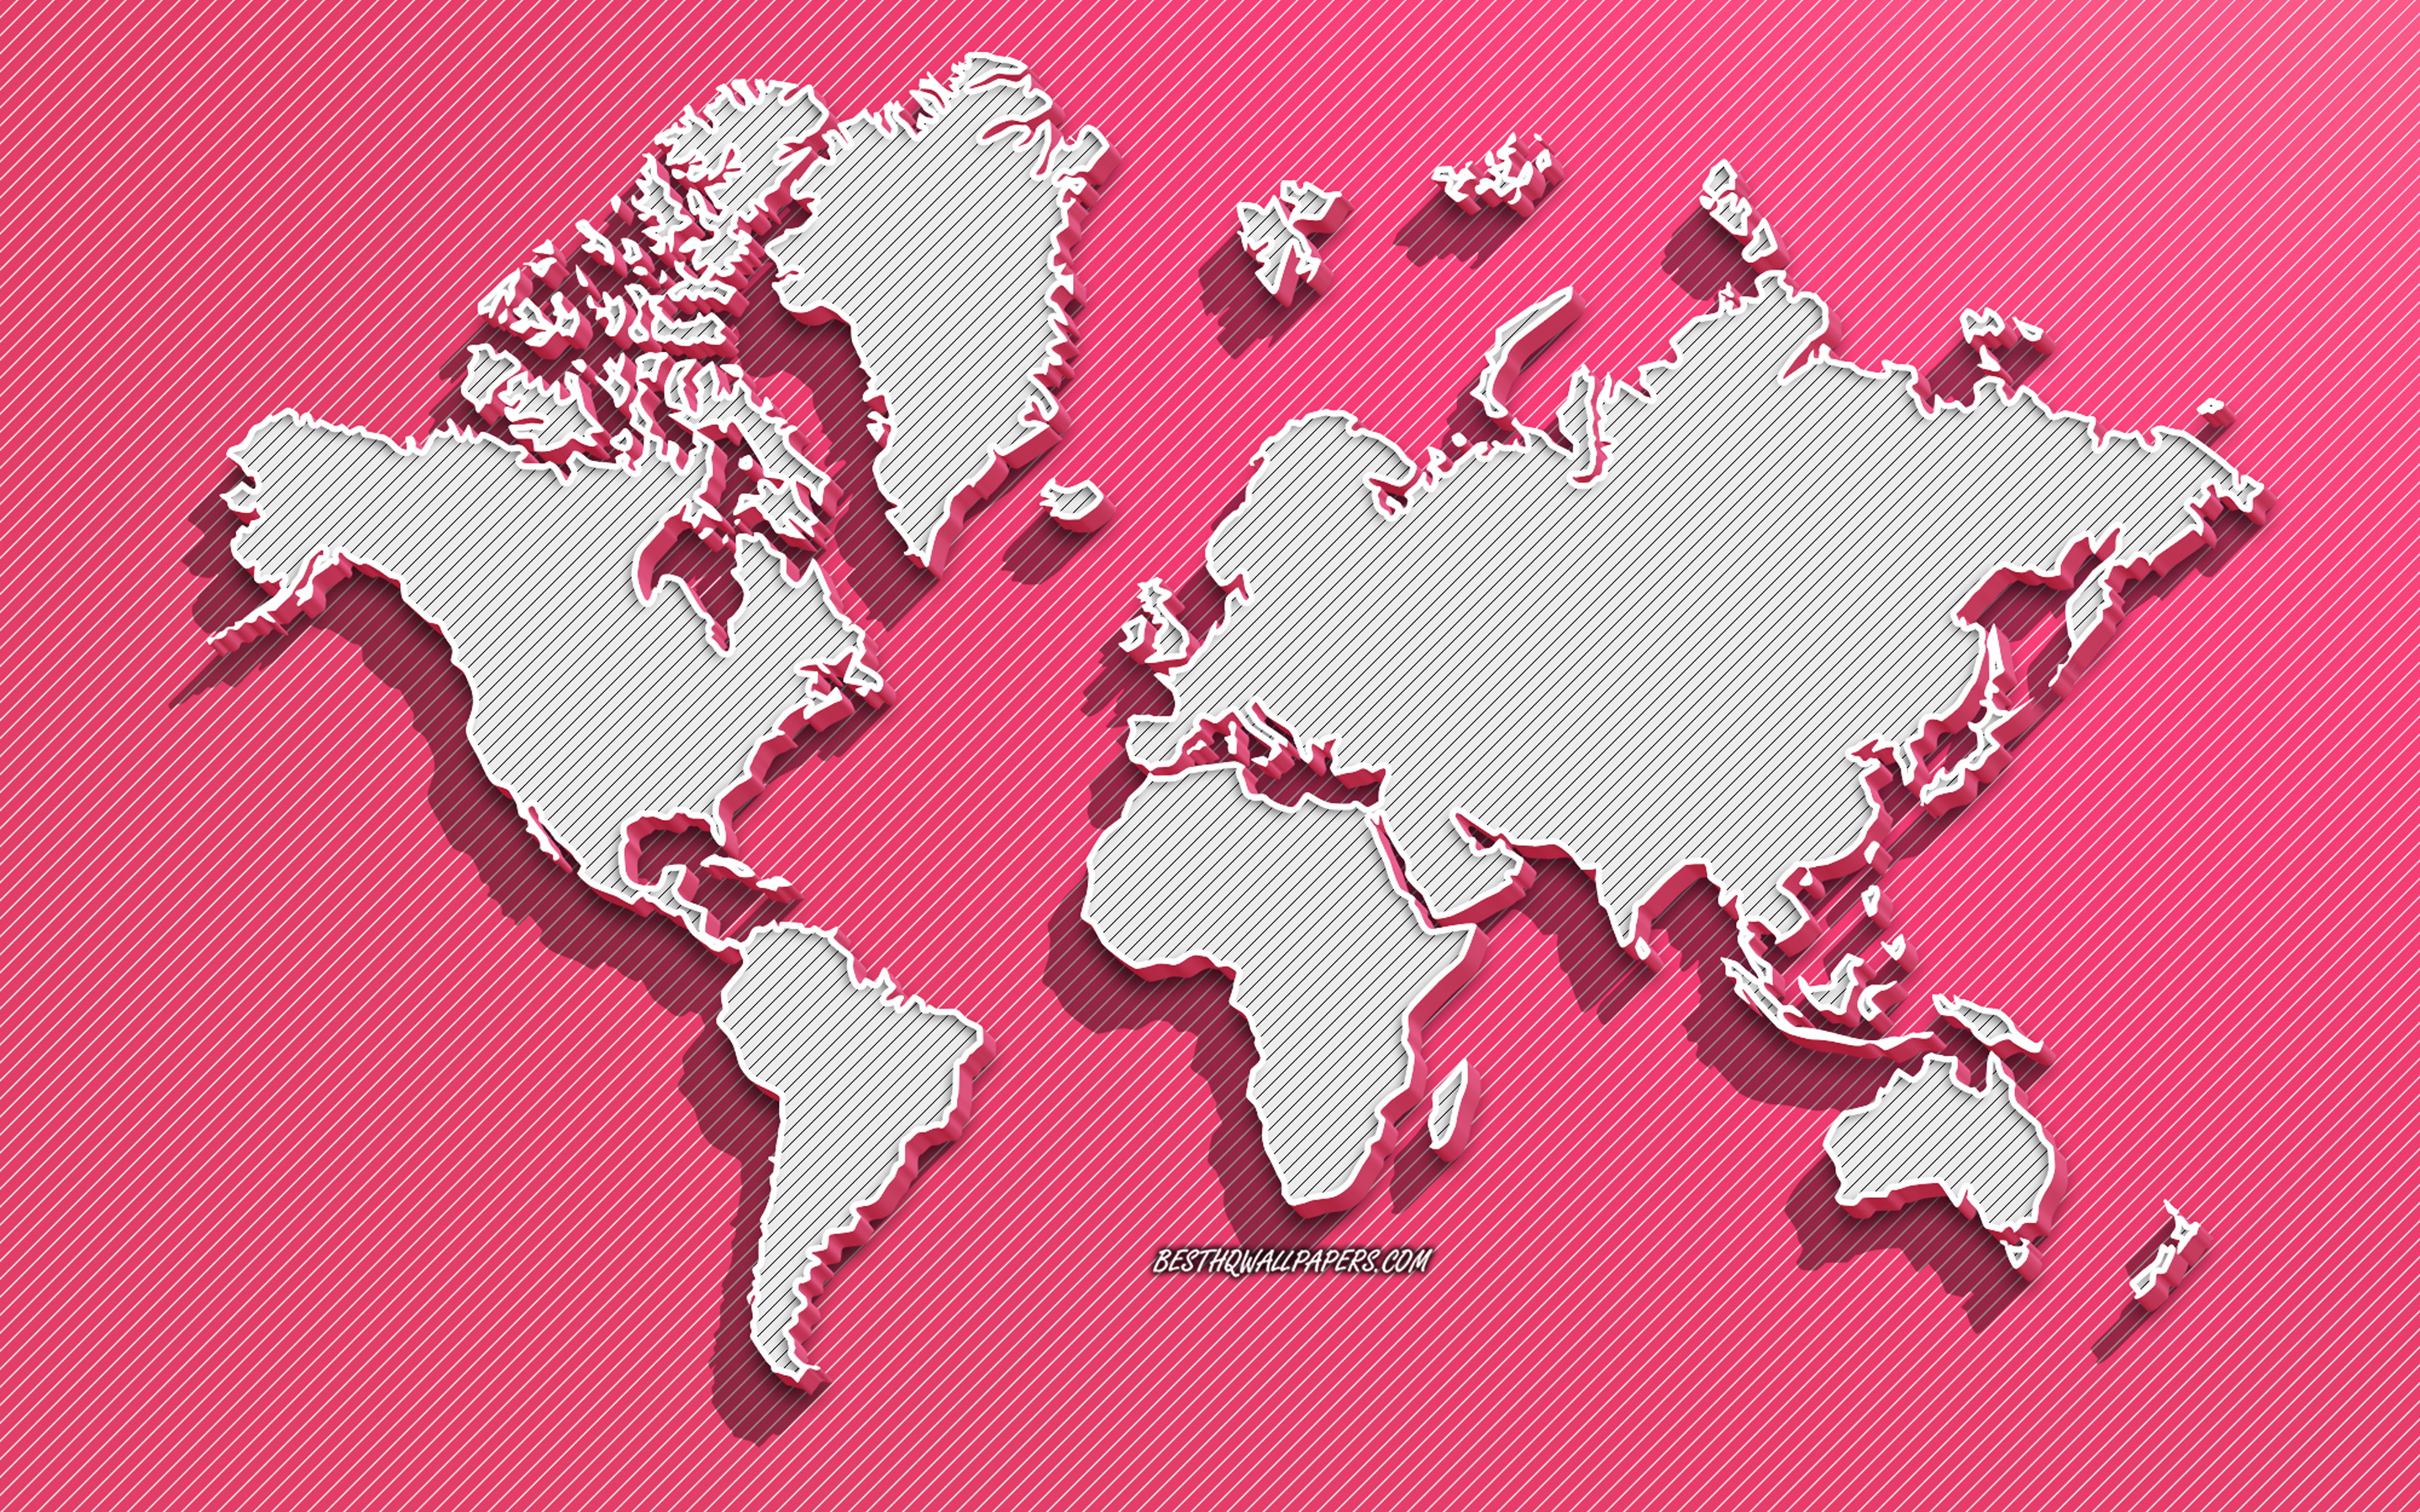 Download wallpaper Pink 3D world map, pink background, 3D world map, continents, world map, North America, South America, Europe, Asia, Australia, world map concepts for desktop with resolution 2880x1800. High Quality HD